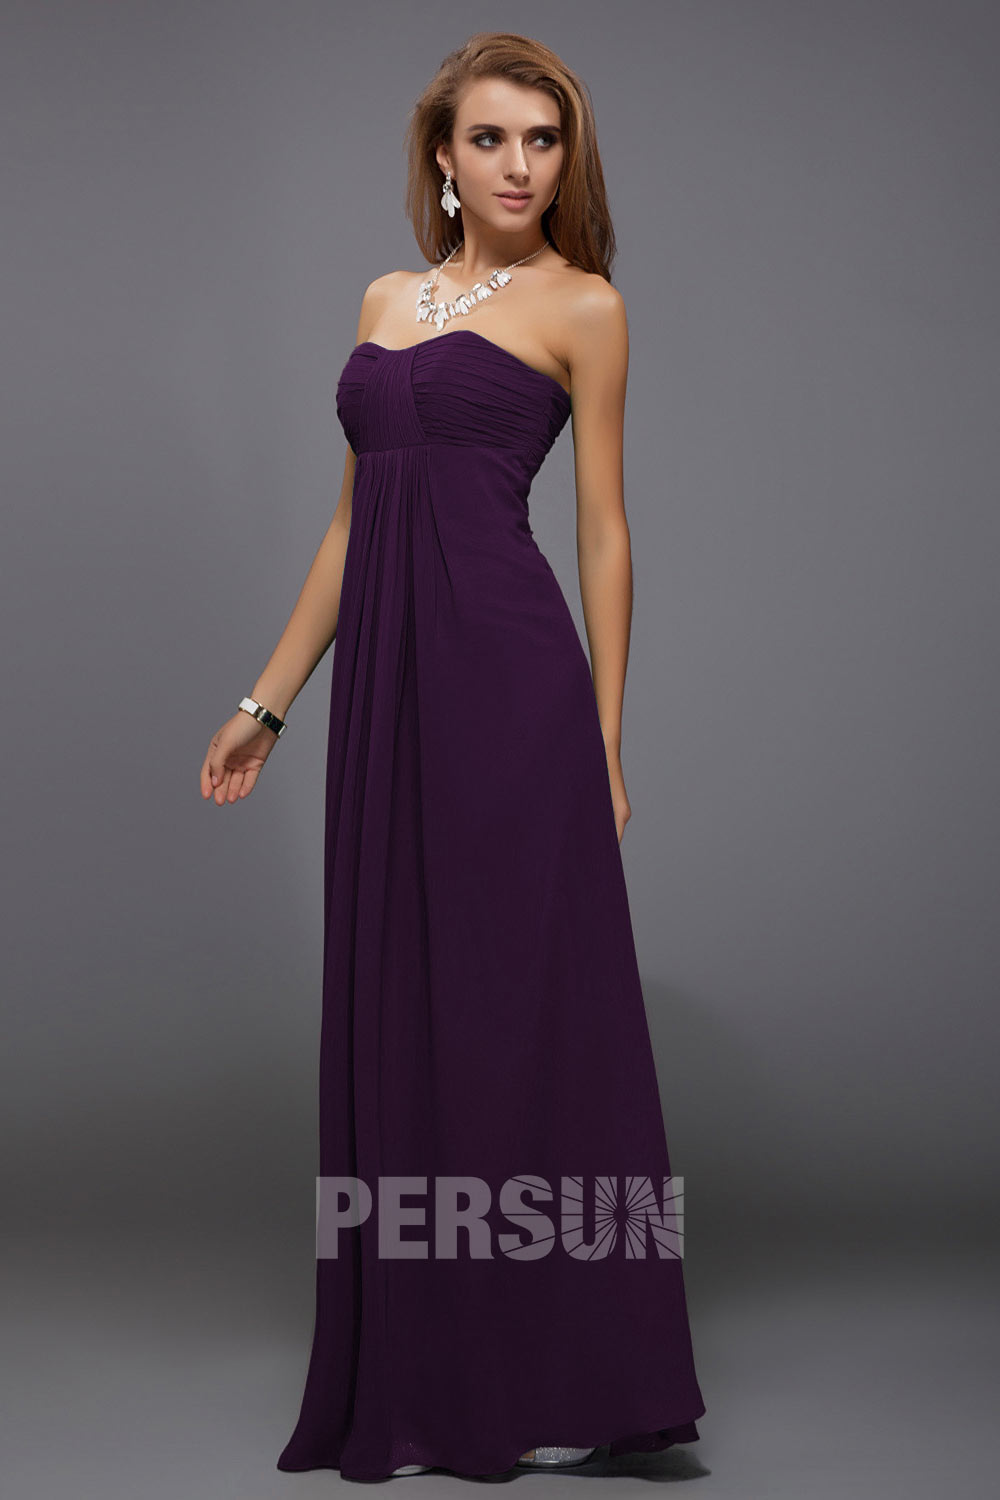 Ruched Strapless Empire A line Chiffon Long Formal Bridesmaid Dress